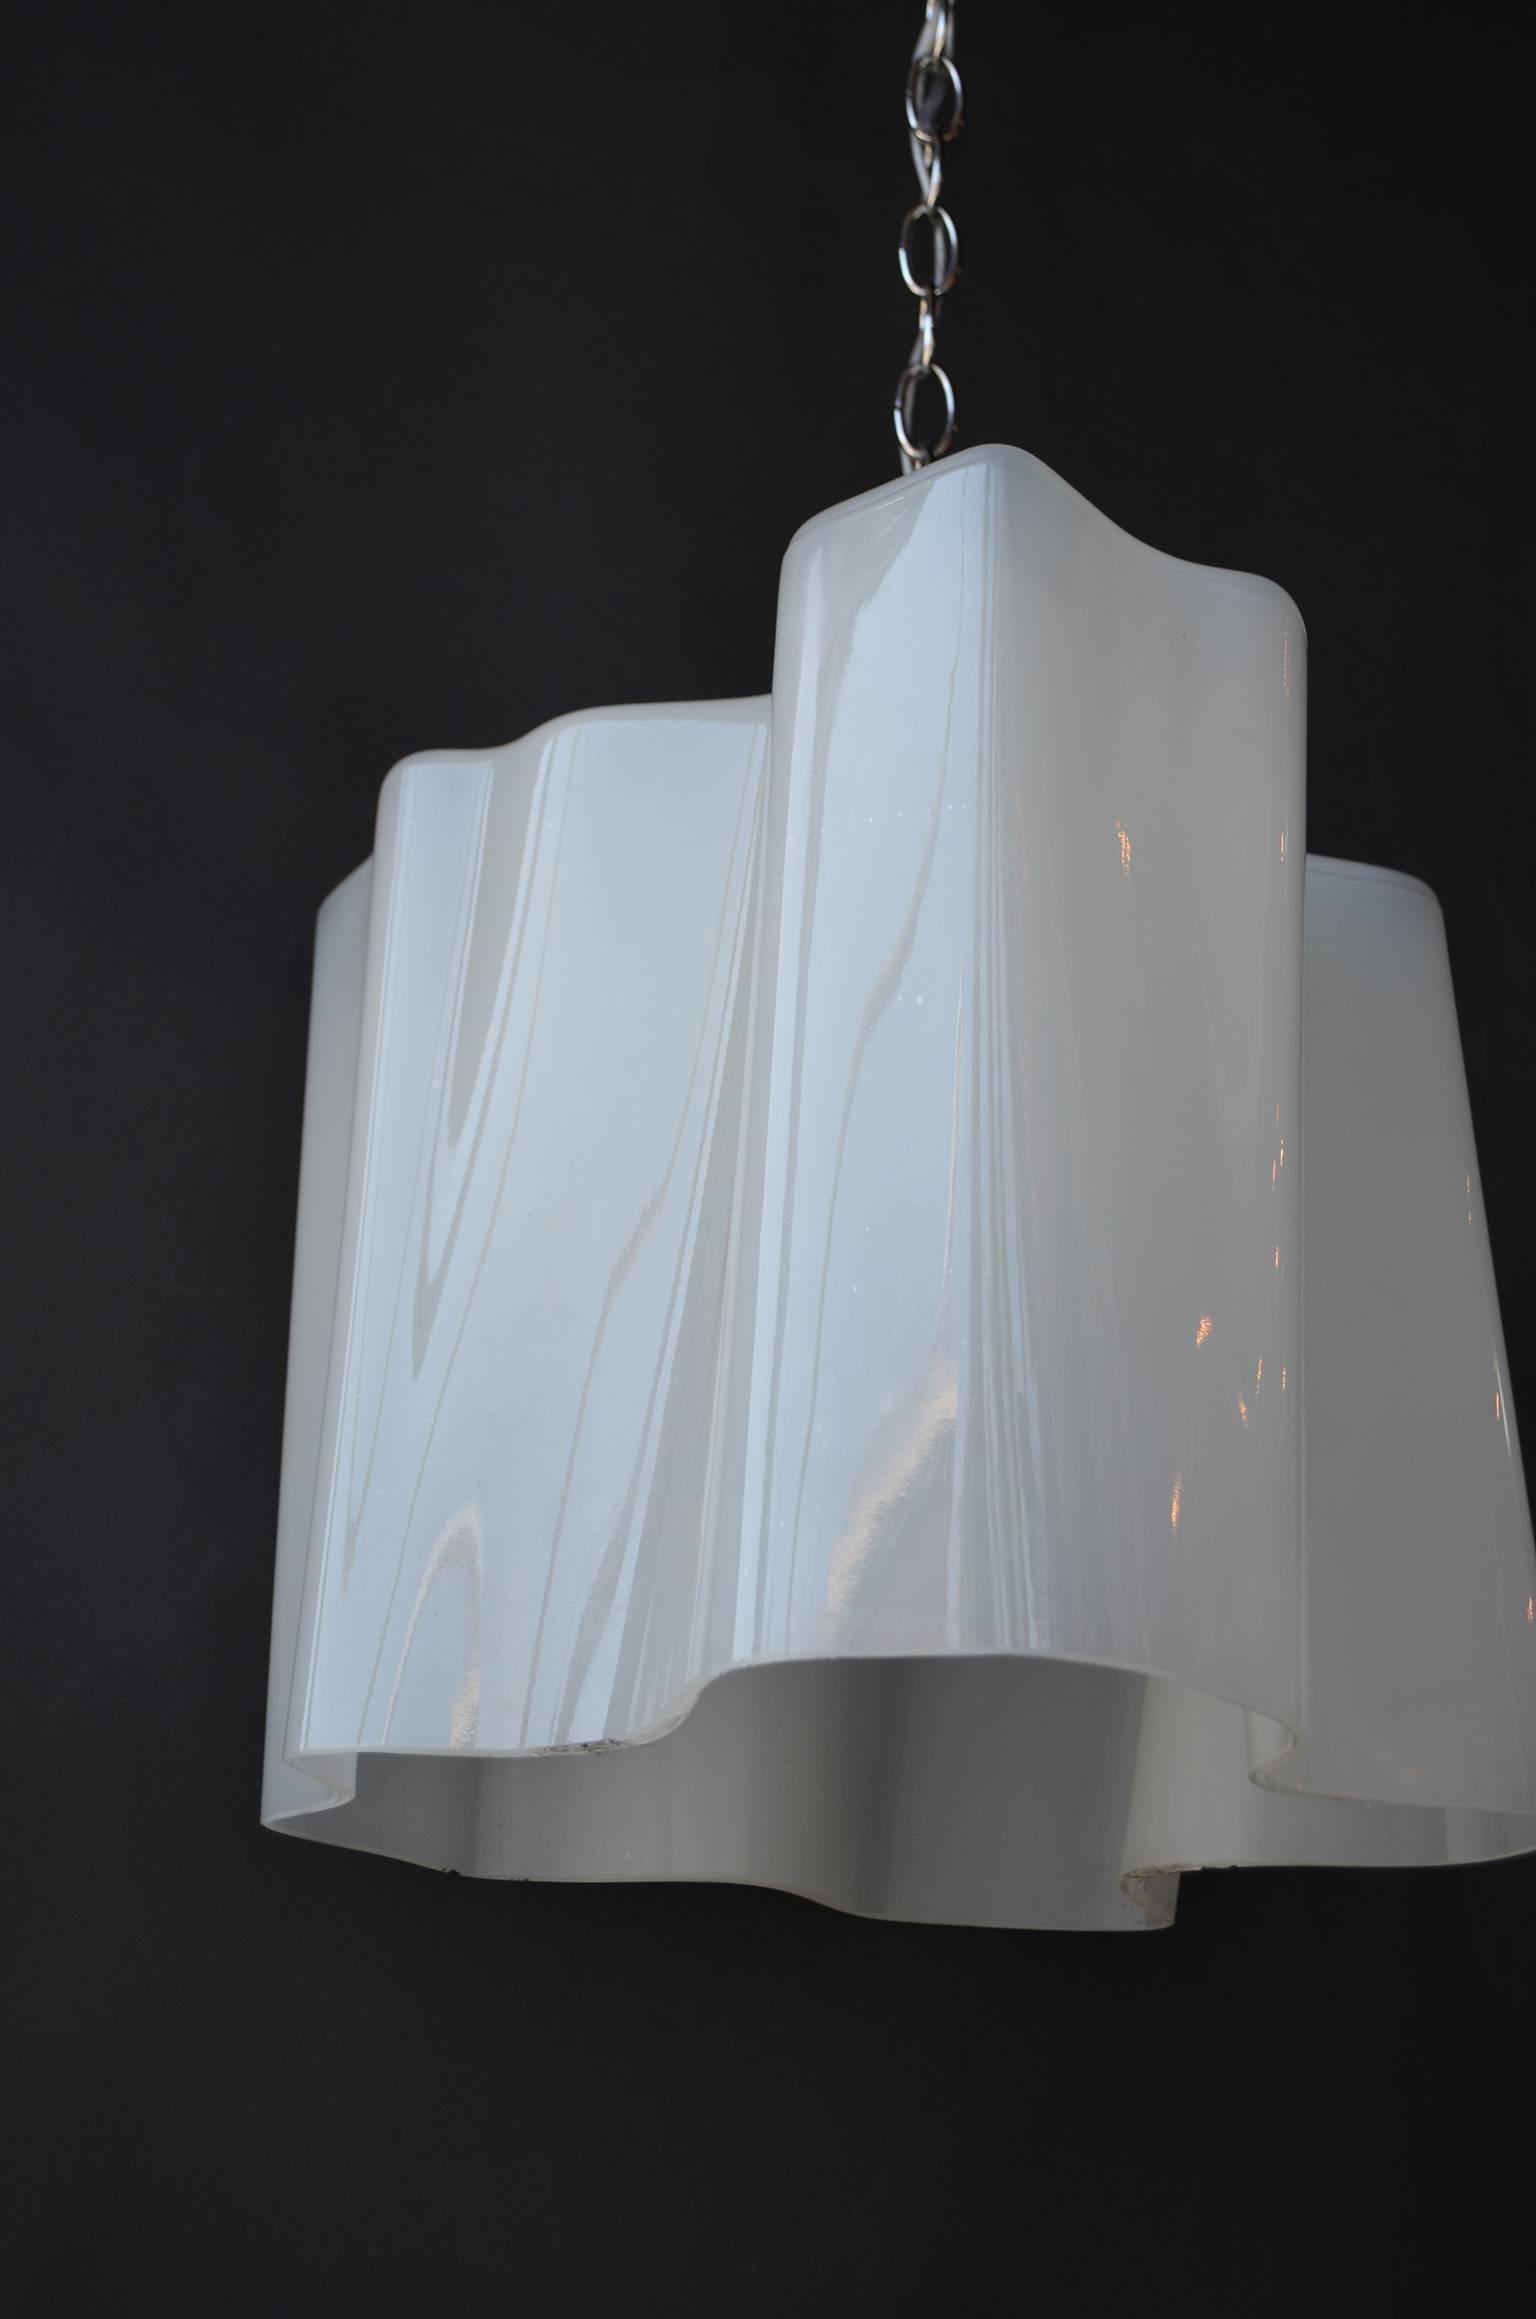 Alvar Aalto Savoy vases, turned in to a pair of pendant lights.
Measurement of the pendant is 12